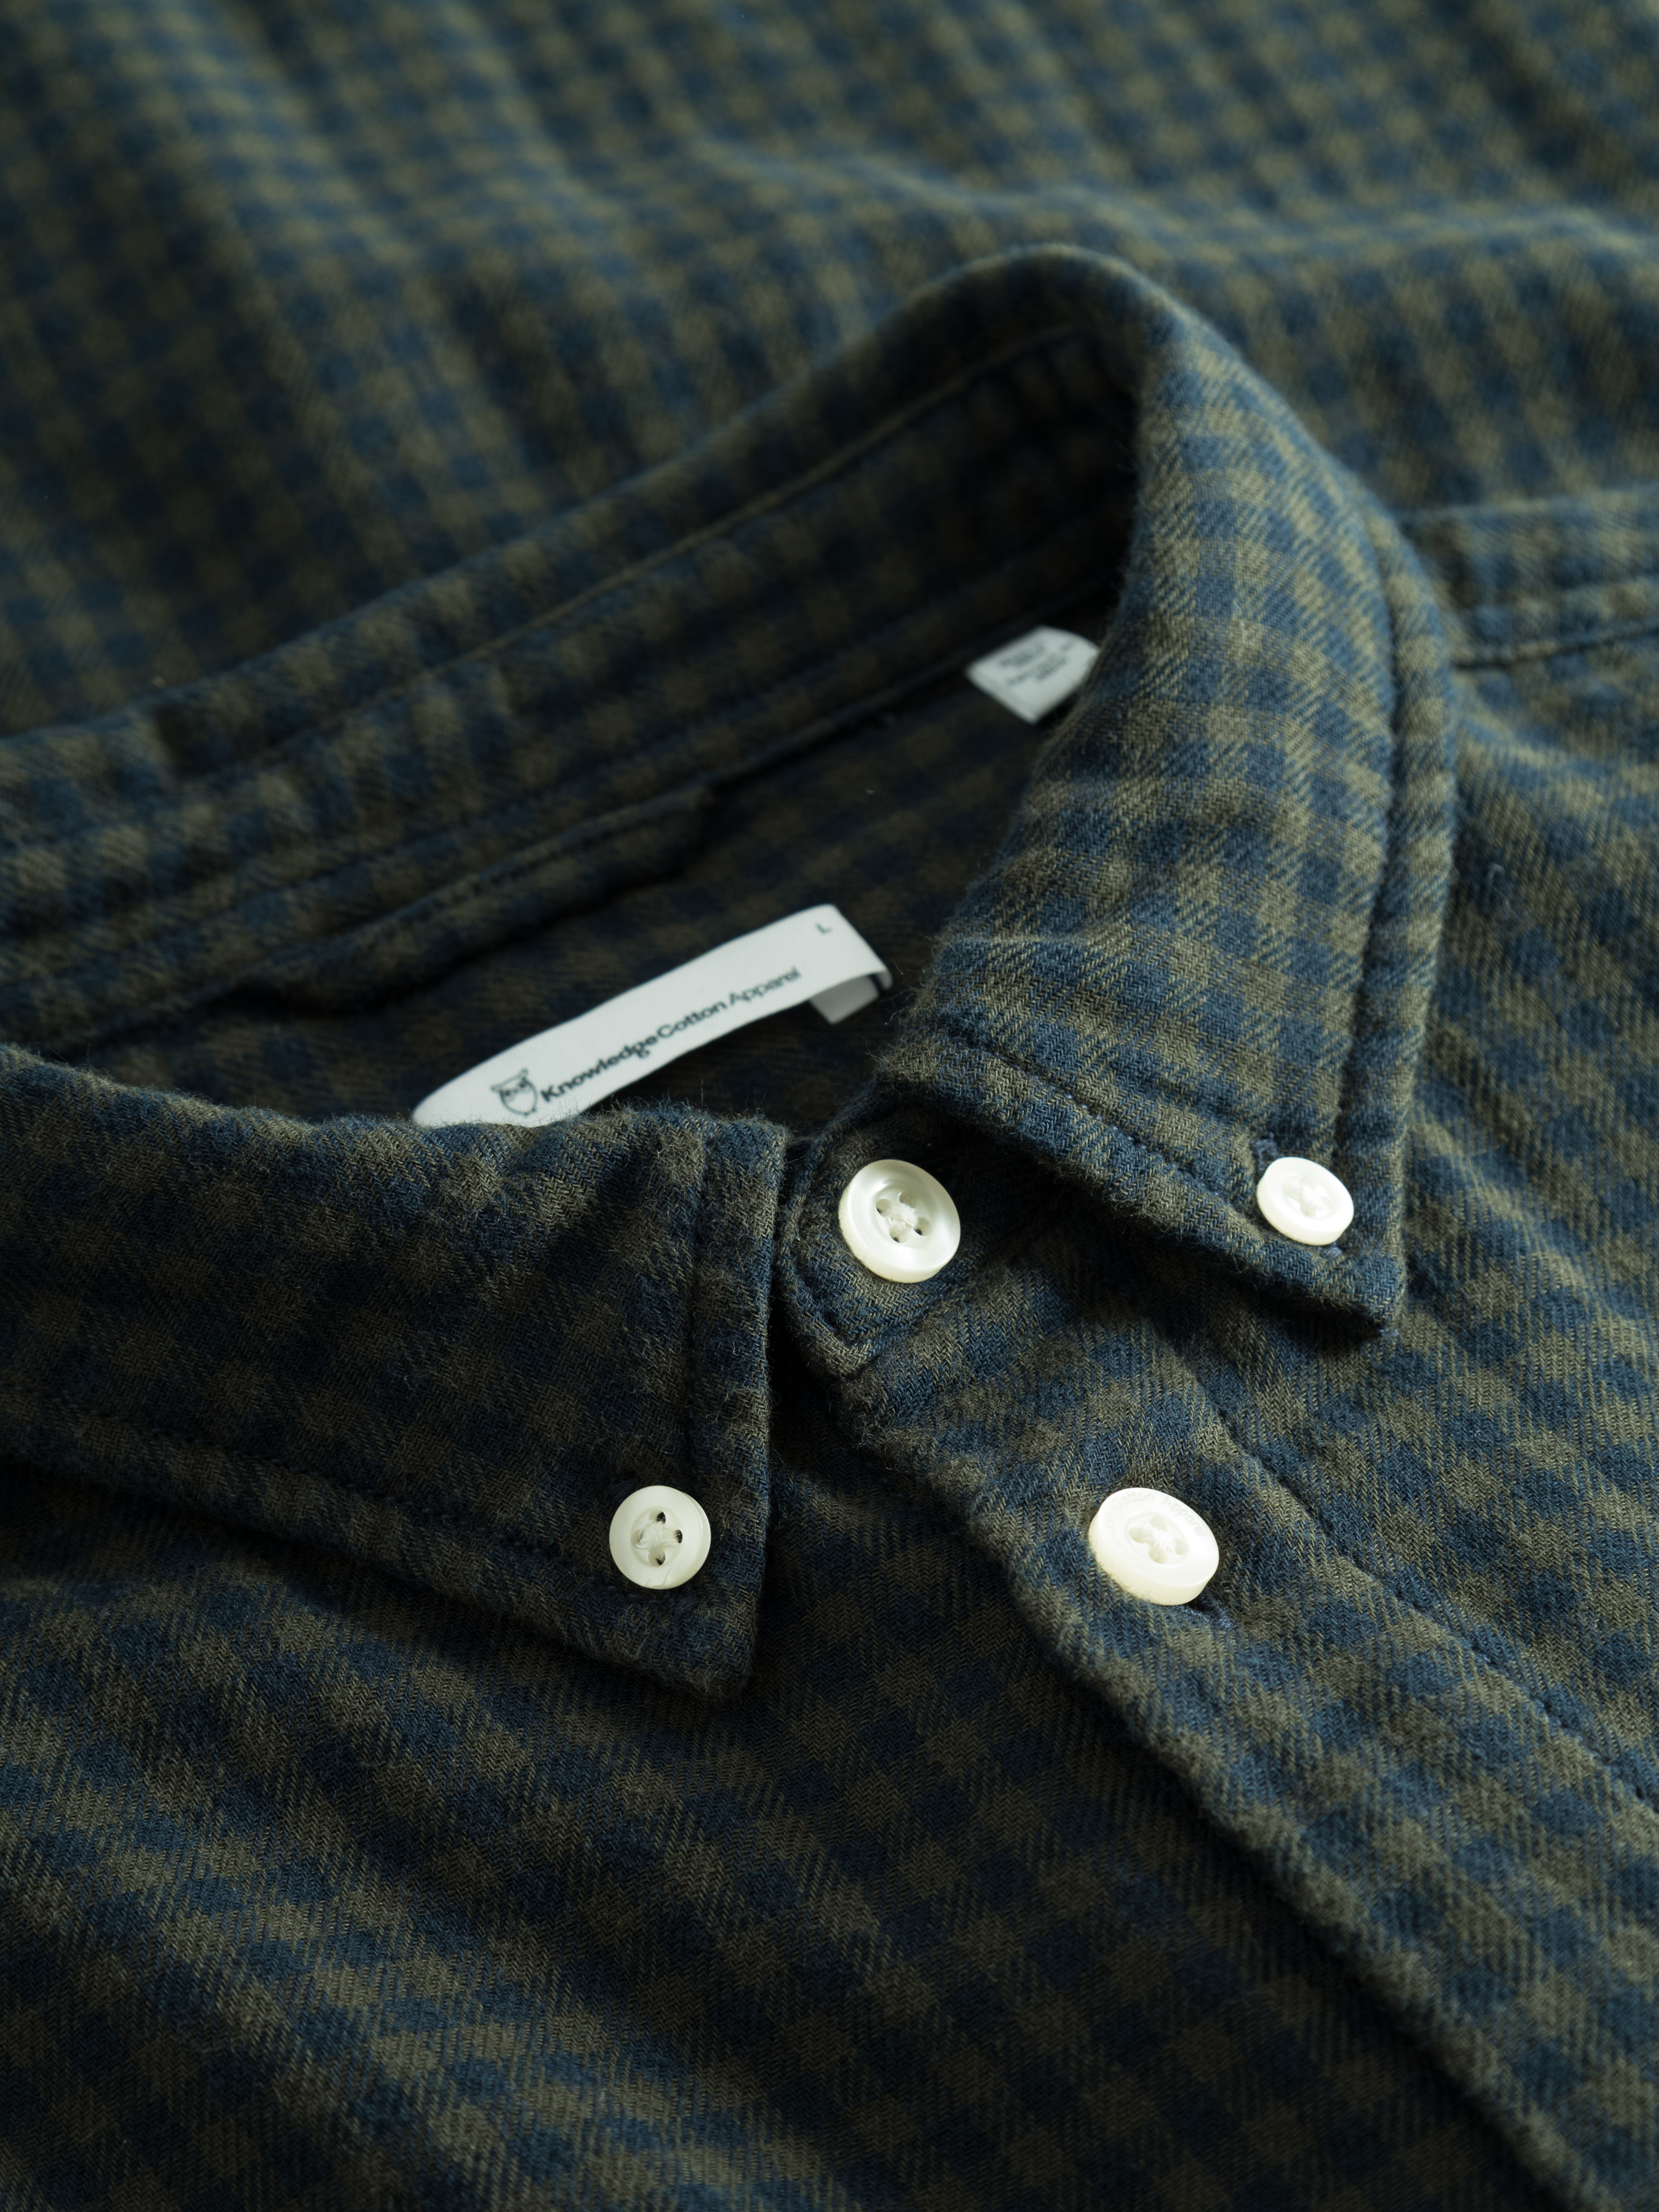 KNOWLEDGE COTTON APPAREL DOUBLE LAYER CHECKERED SHIRT - GREEN